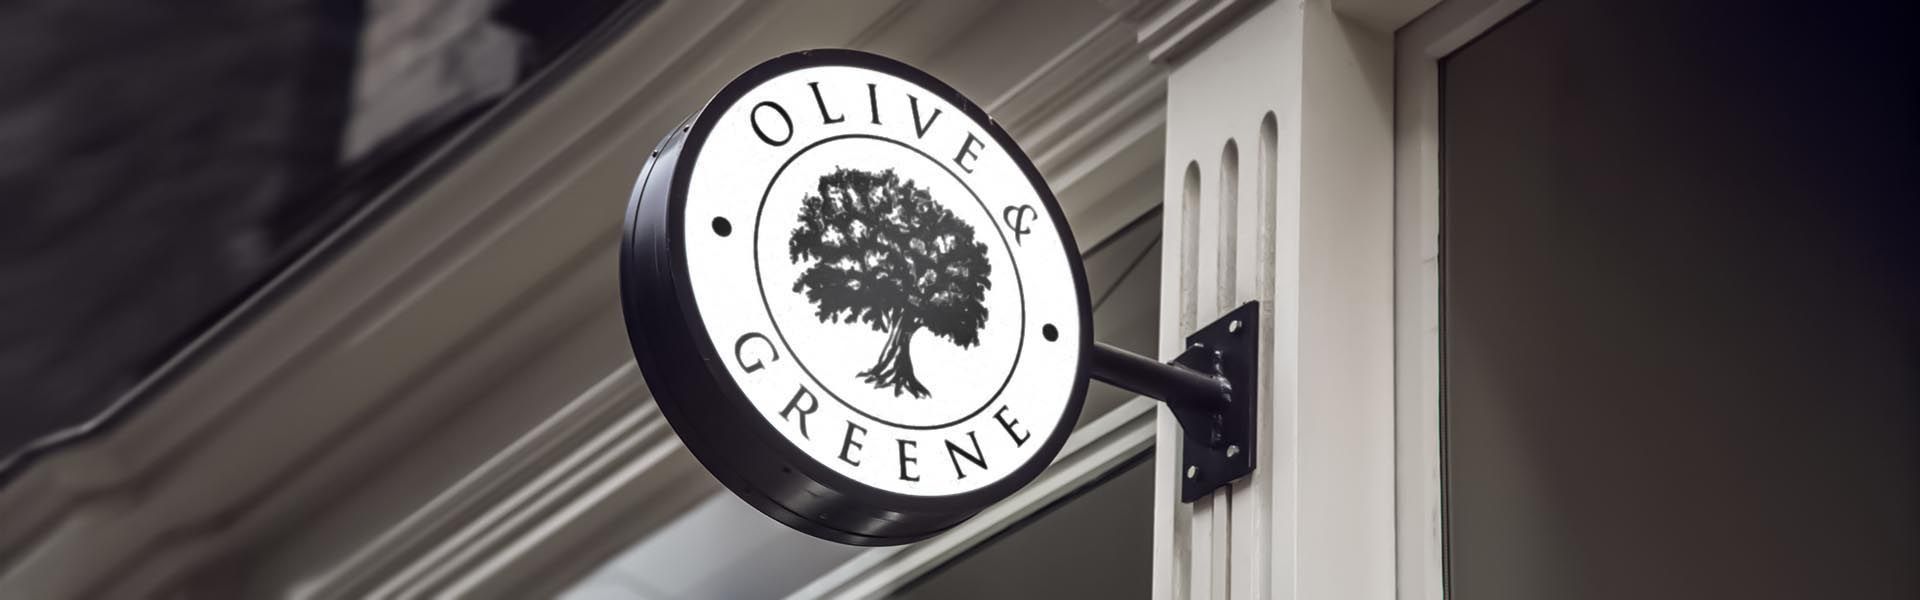 a sign on the side of a building that says olive & greene